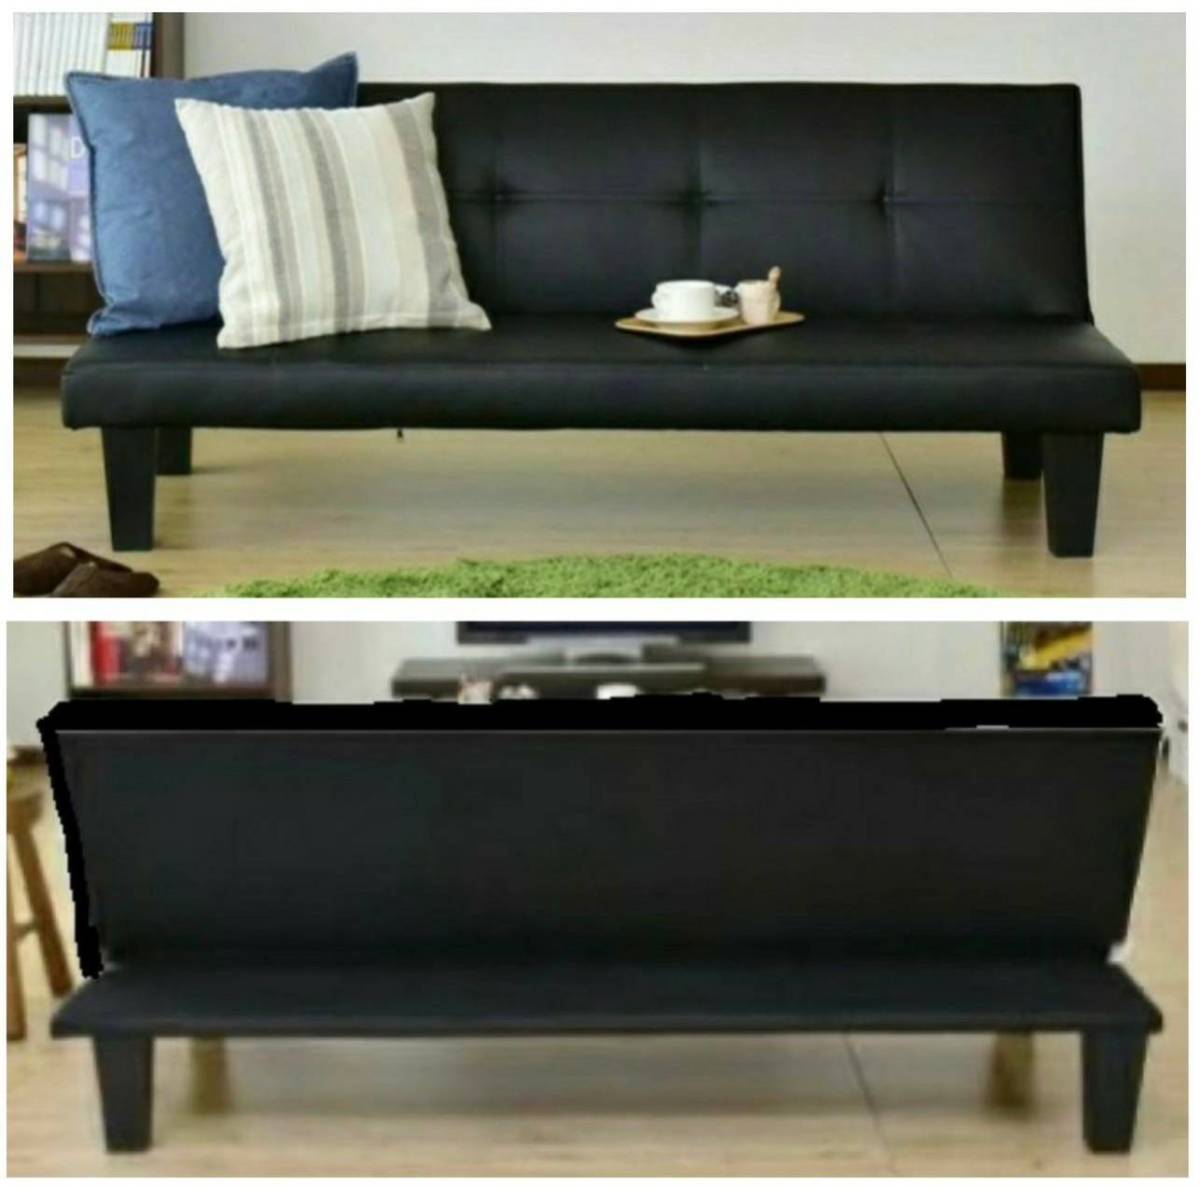  unused translation have A 3 -step reclining PVC leather sofa bed 2WAY width 165. withstand load 120kg L3388 black 